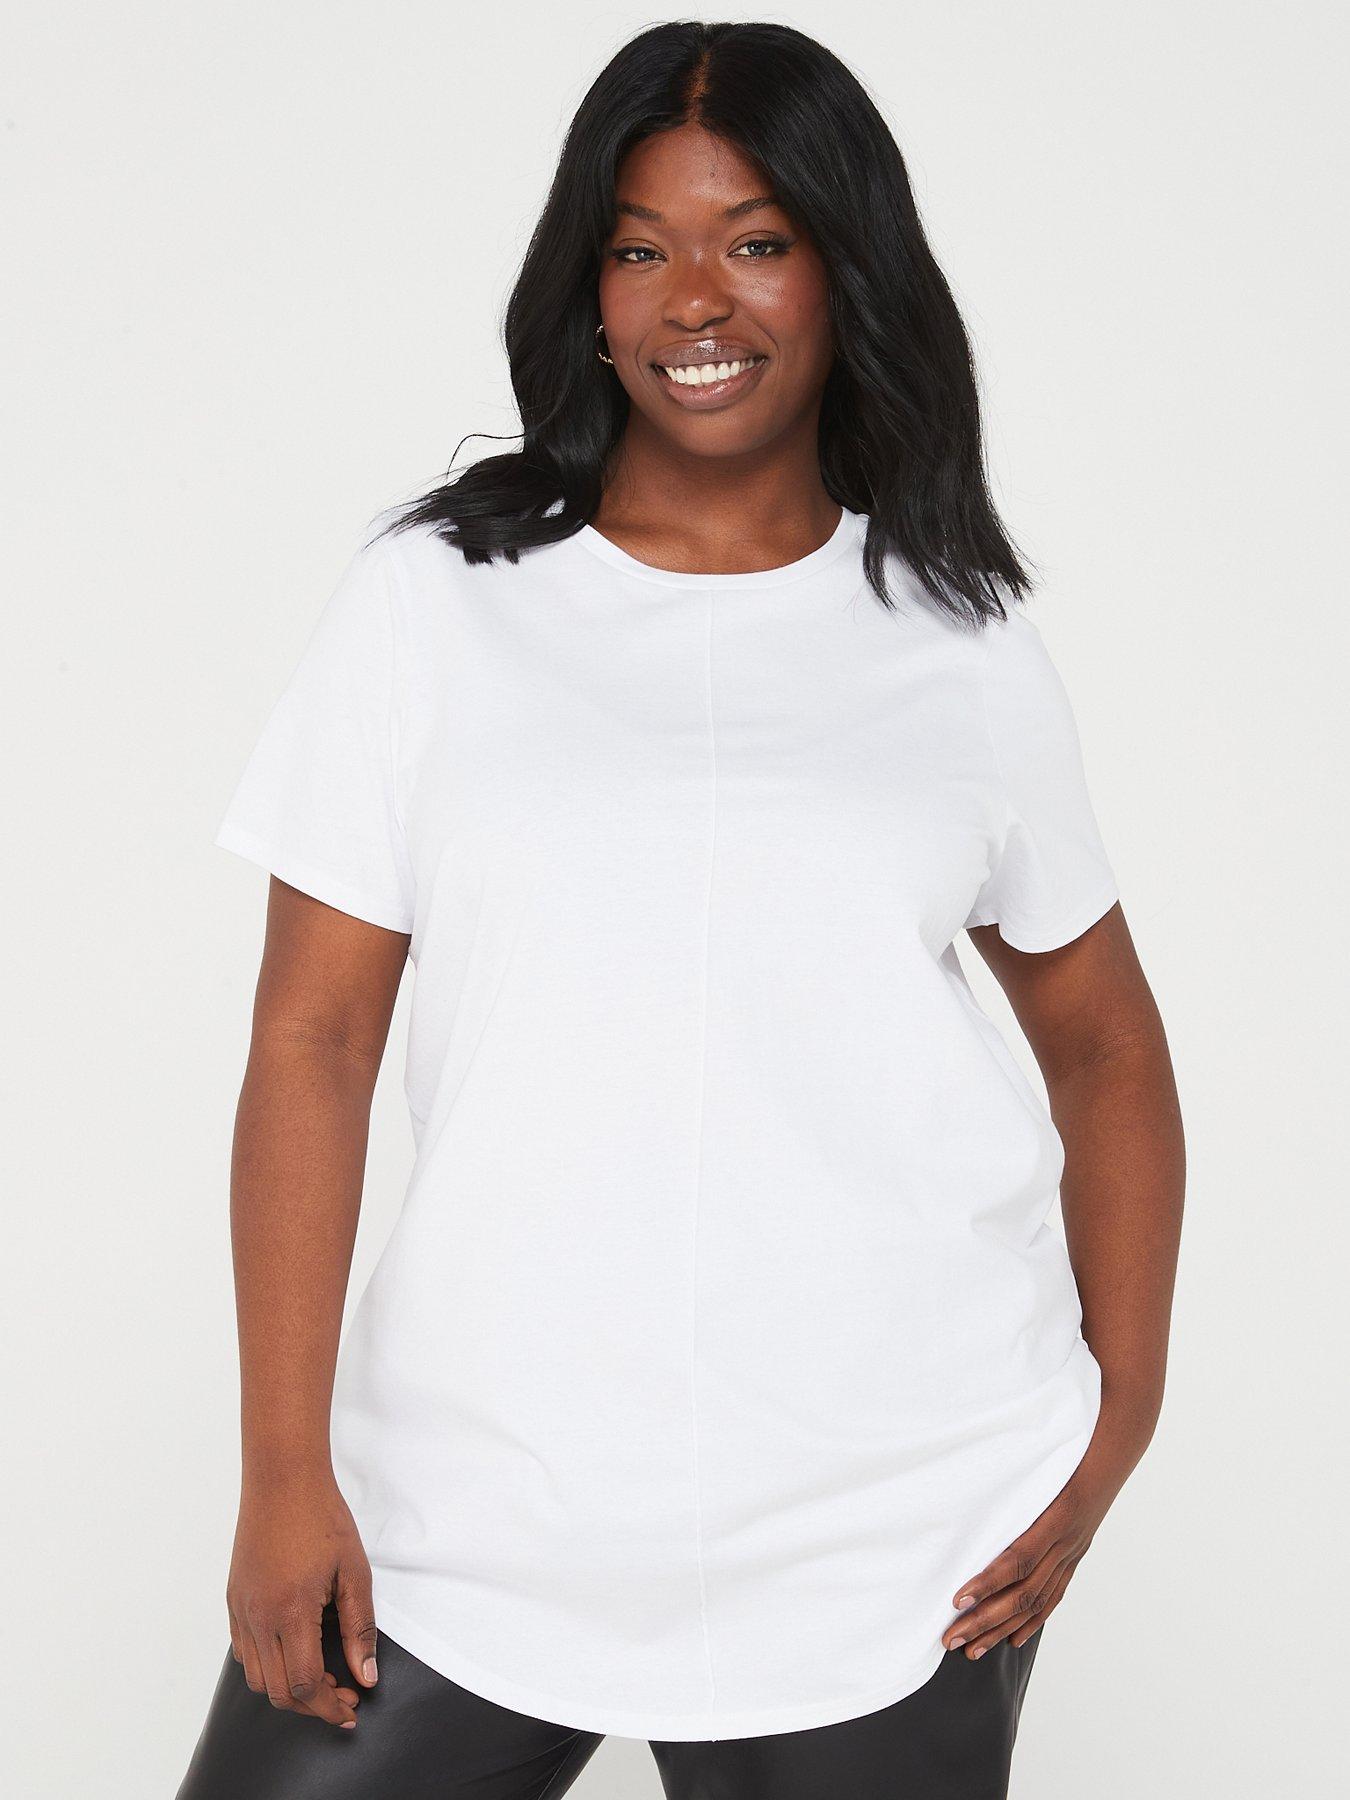 Plus Size Ladies White TShirt 4xl Womens Large T Shirts Breathable Summer  Top